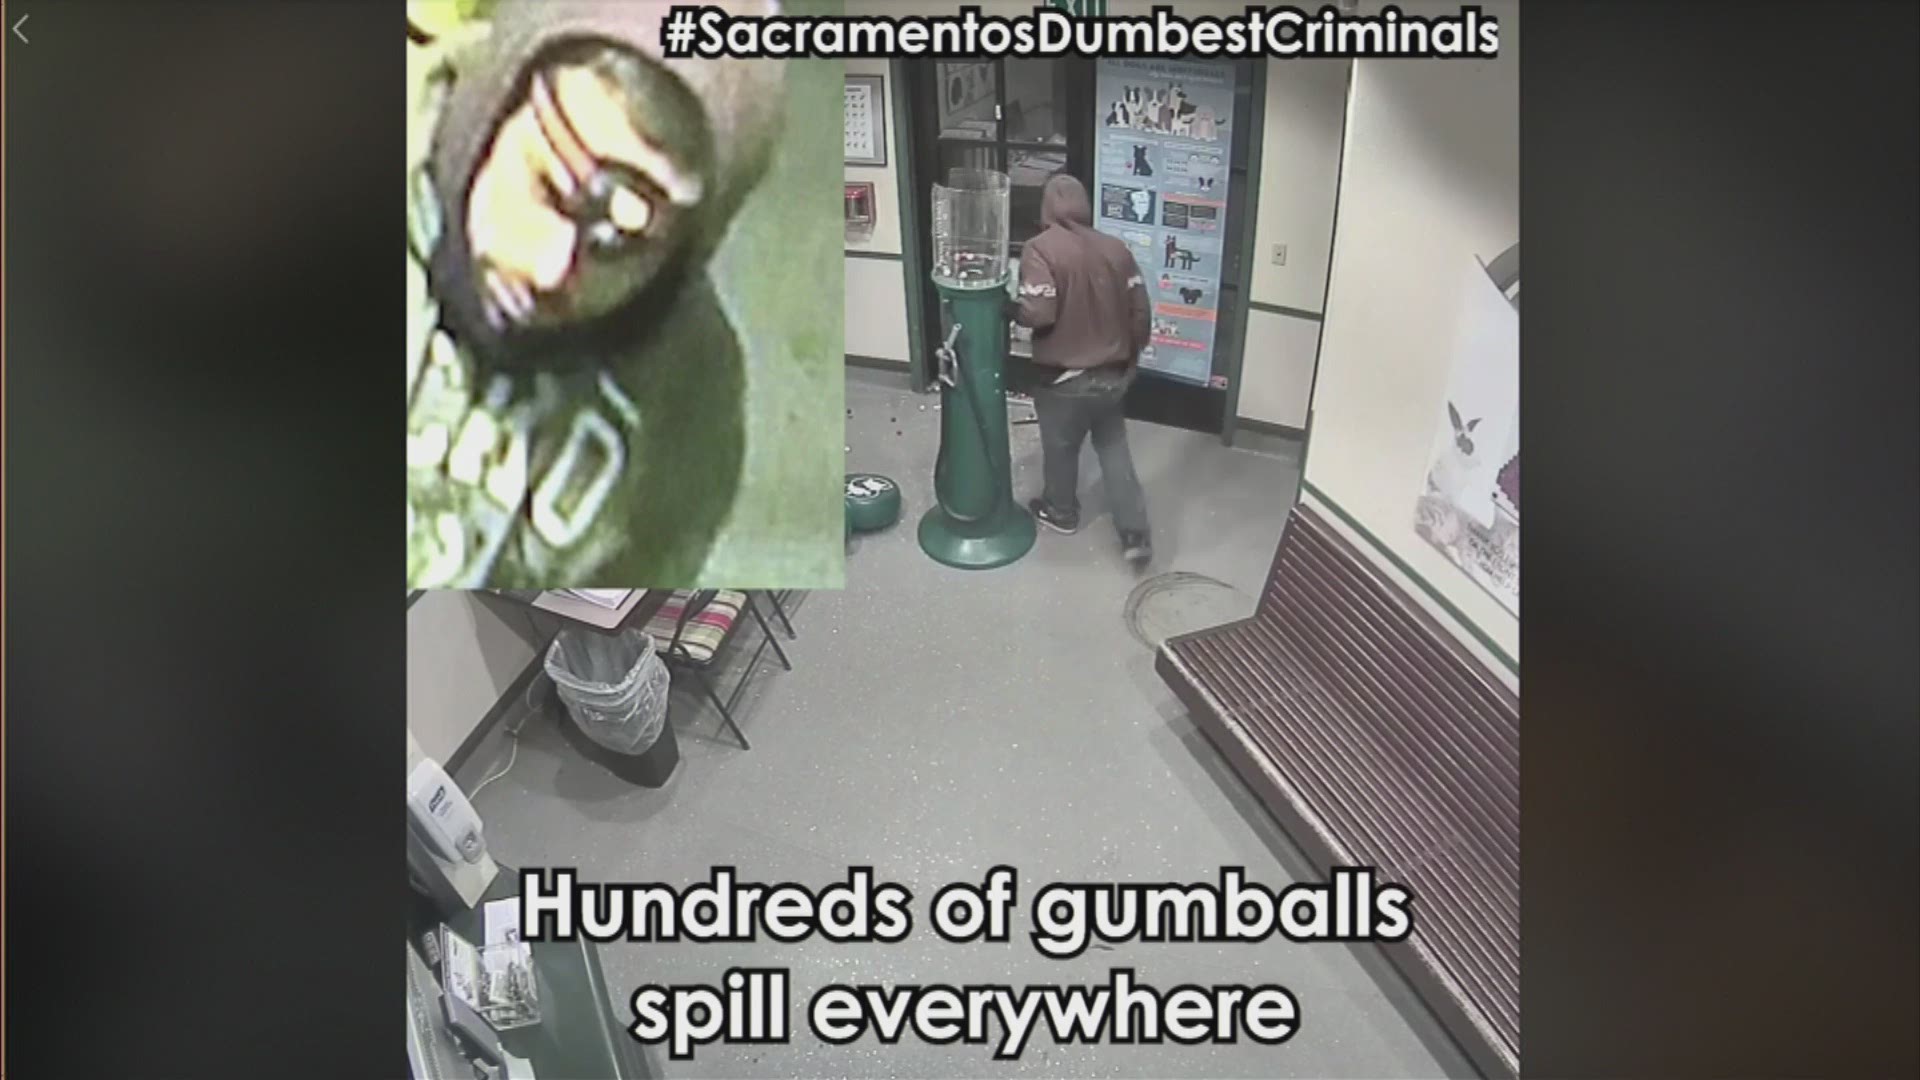 A man nicknamed the "Gumball Bandit" struggled to steal a fundraising gumball machine from a Sacramento animal shelter. It was caught on video.